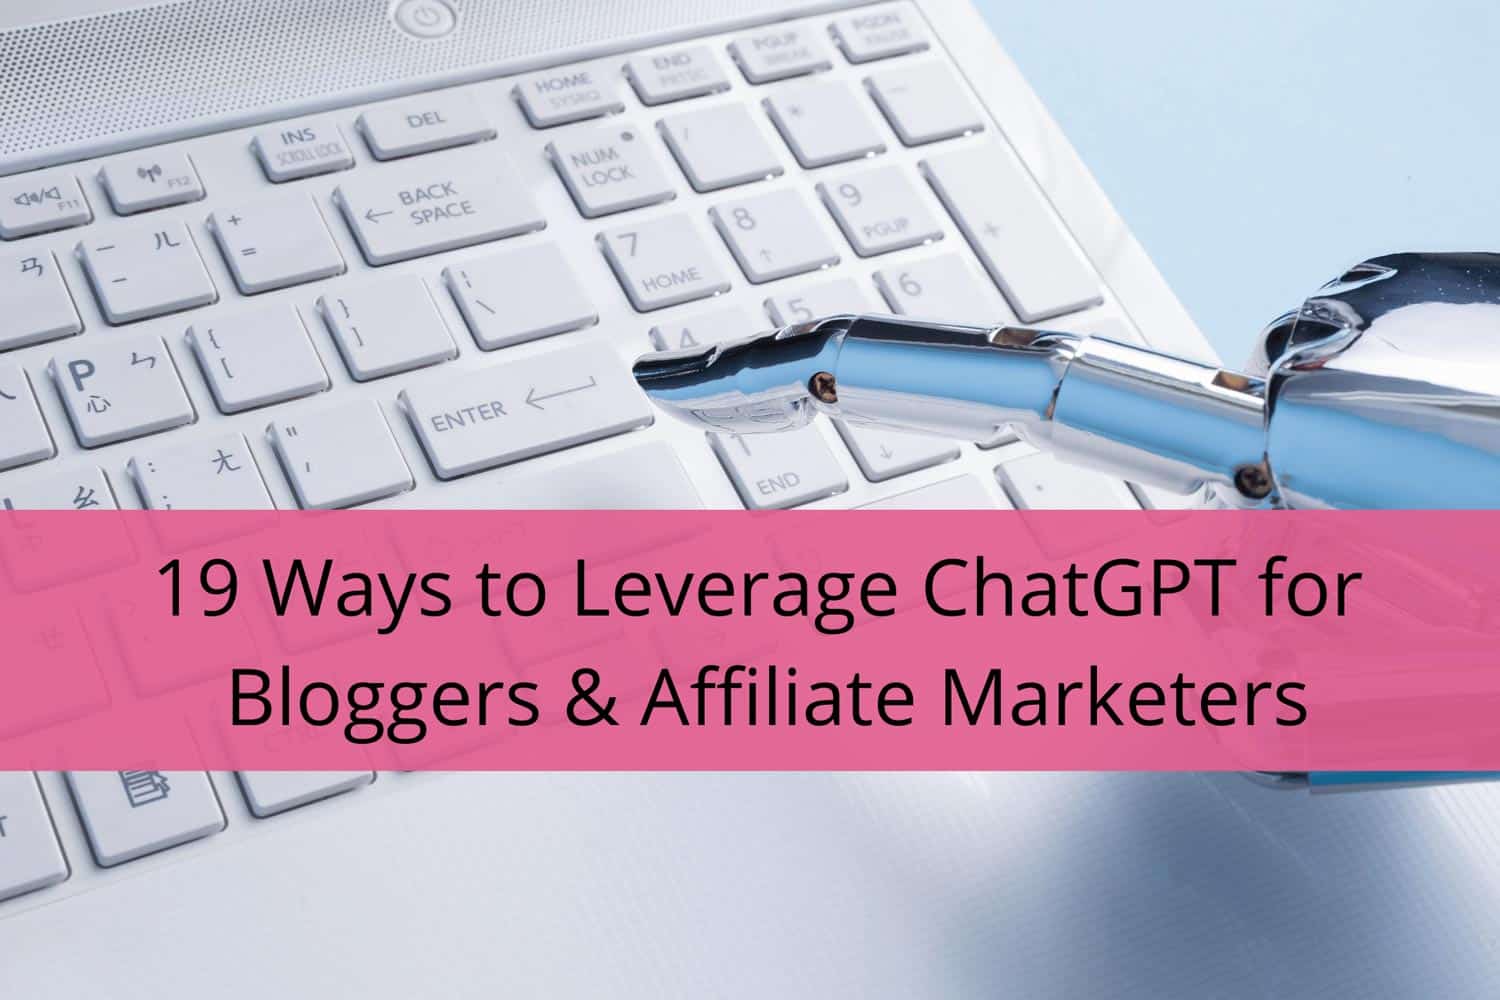 19 Ways to Leverage ChatGPT for Bloggers & Affiliate Marketers
